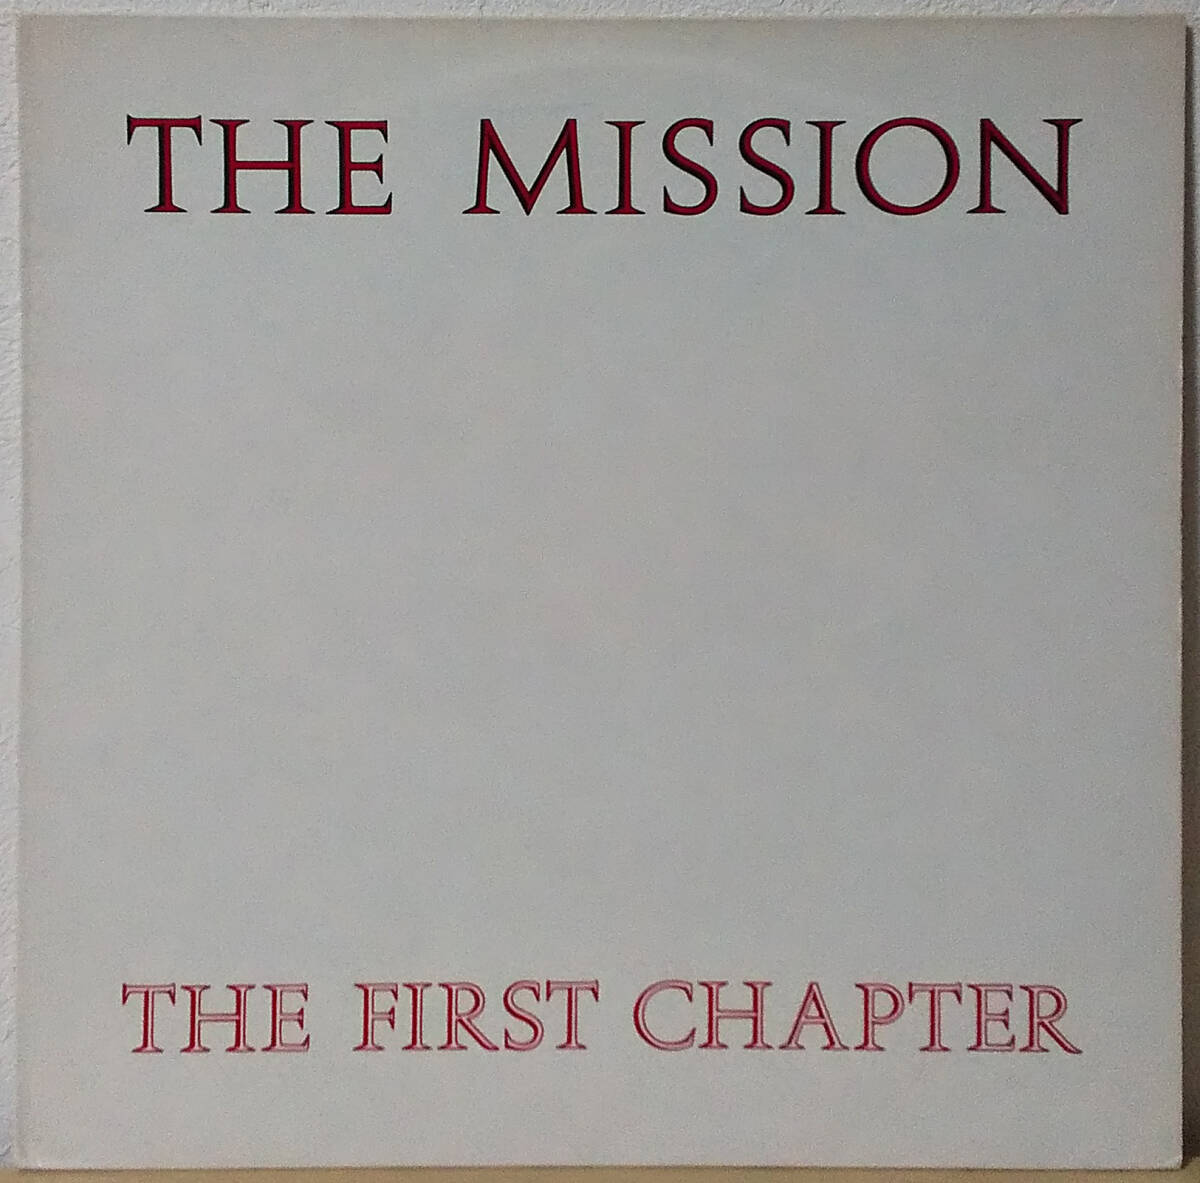 The Mission The First Chapter UK盤 LP Mercury - MISH 1 ザ・ミッション 1987年 Sisters of Mercy, gothic rock_画像1